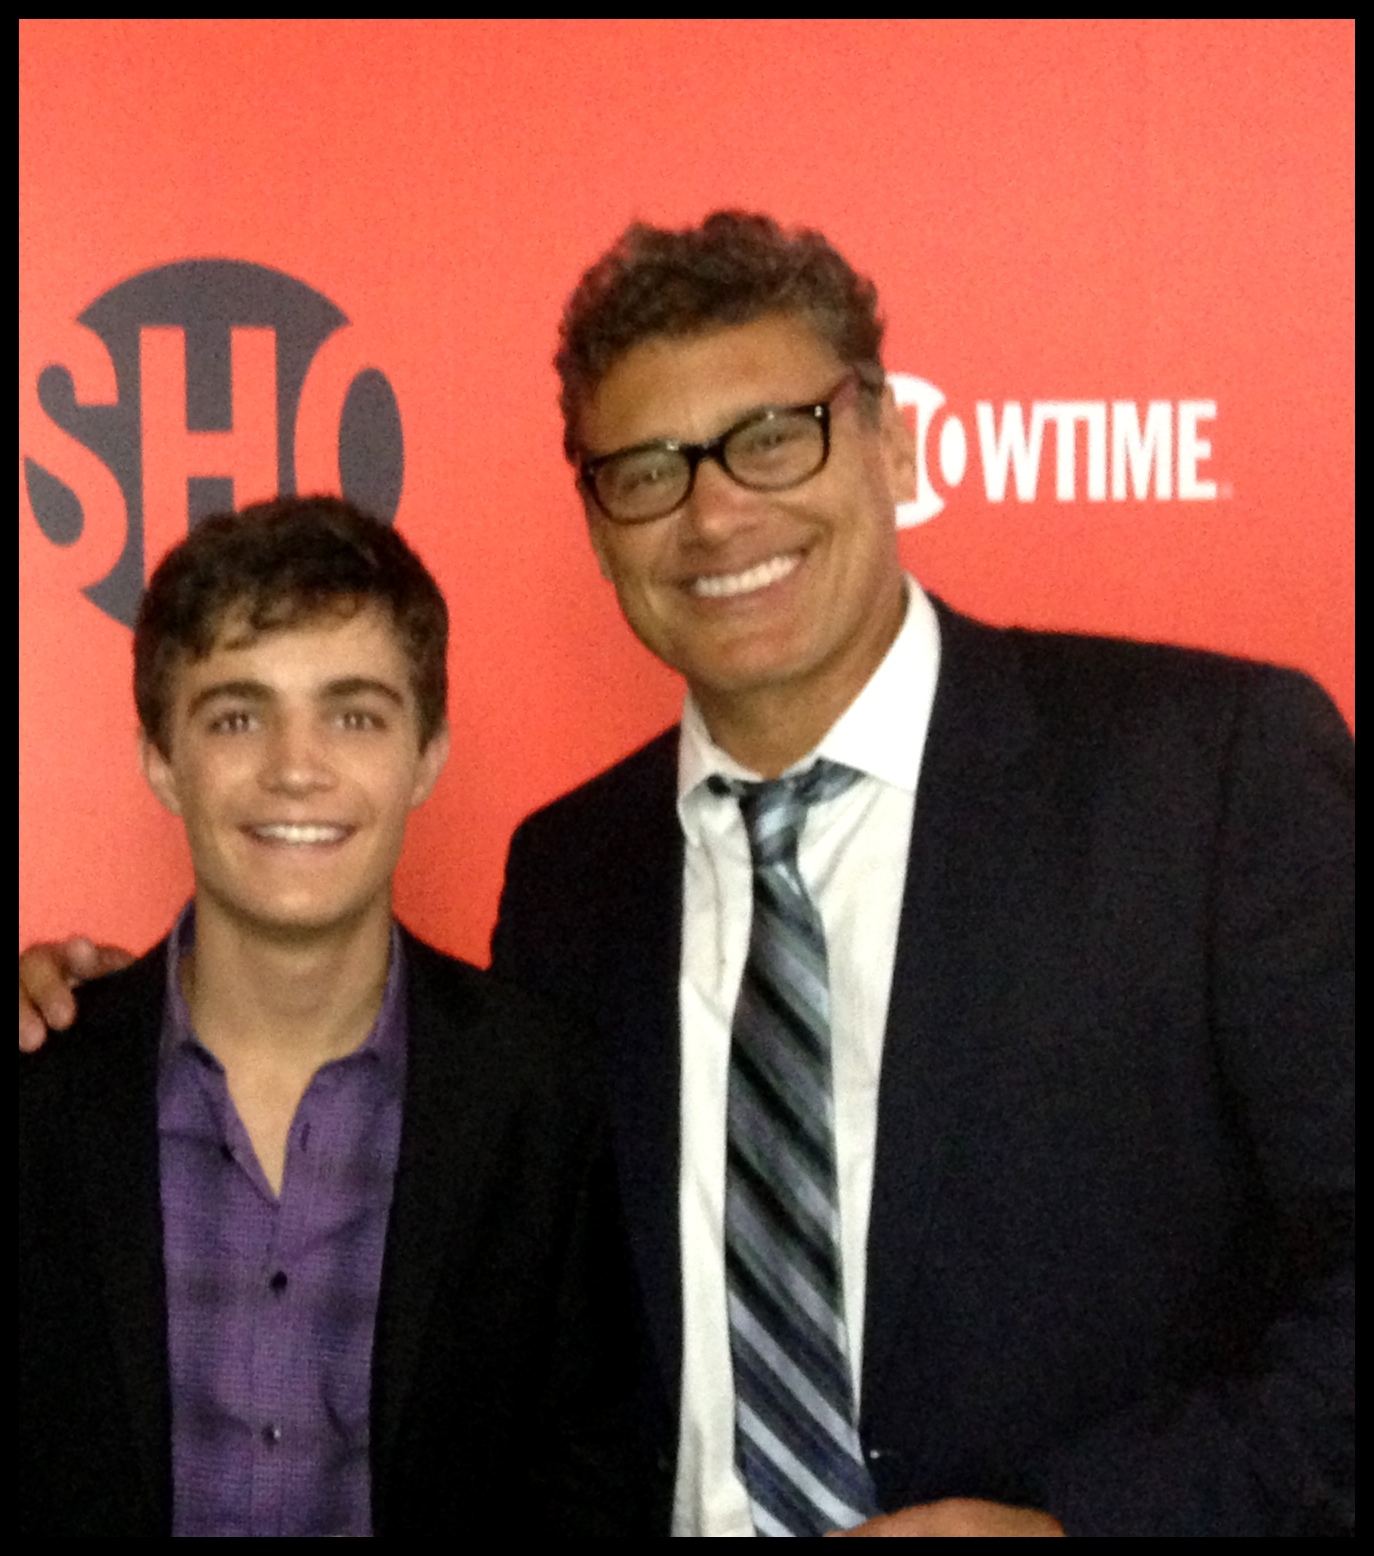 Devon Bagby and Steven Bauer at the Showtime Emmy Party